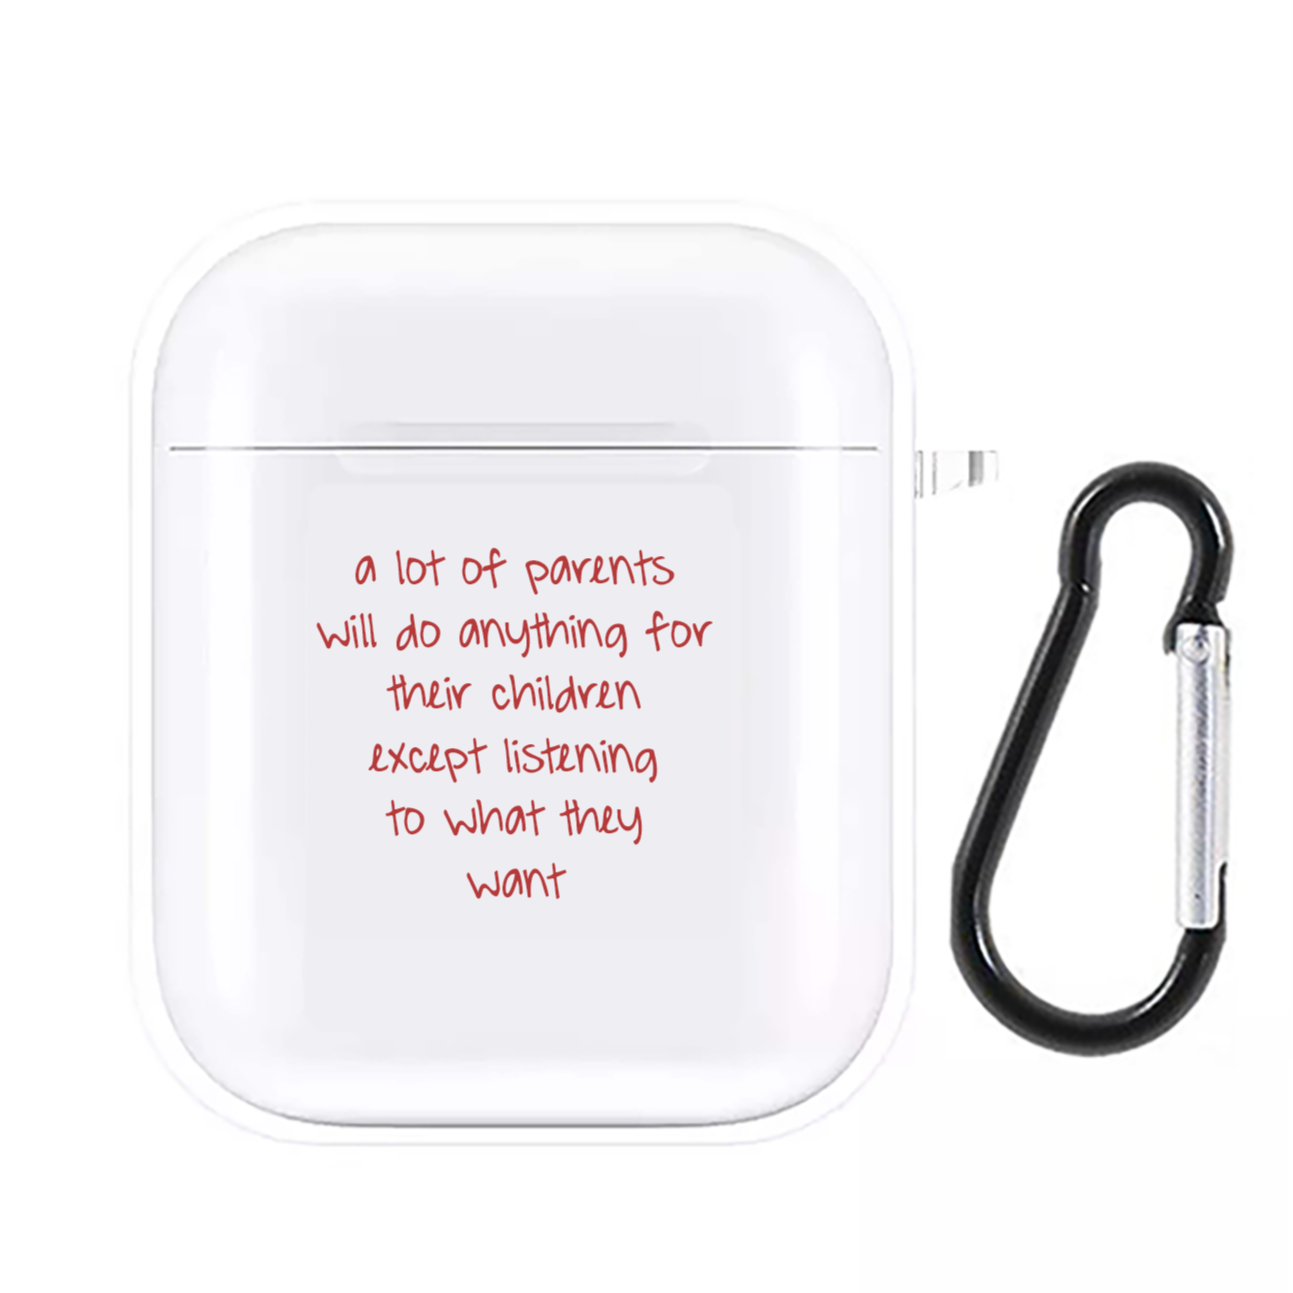 Anything For Their Children AirPods Case